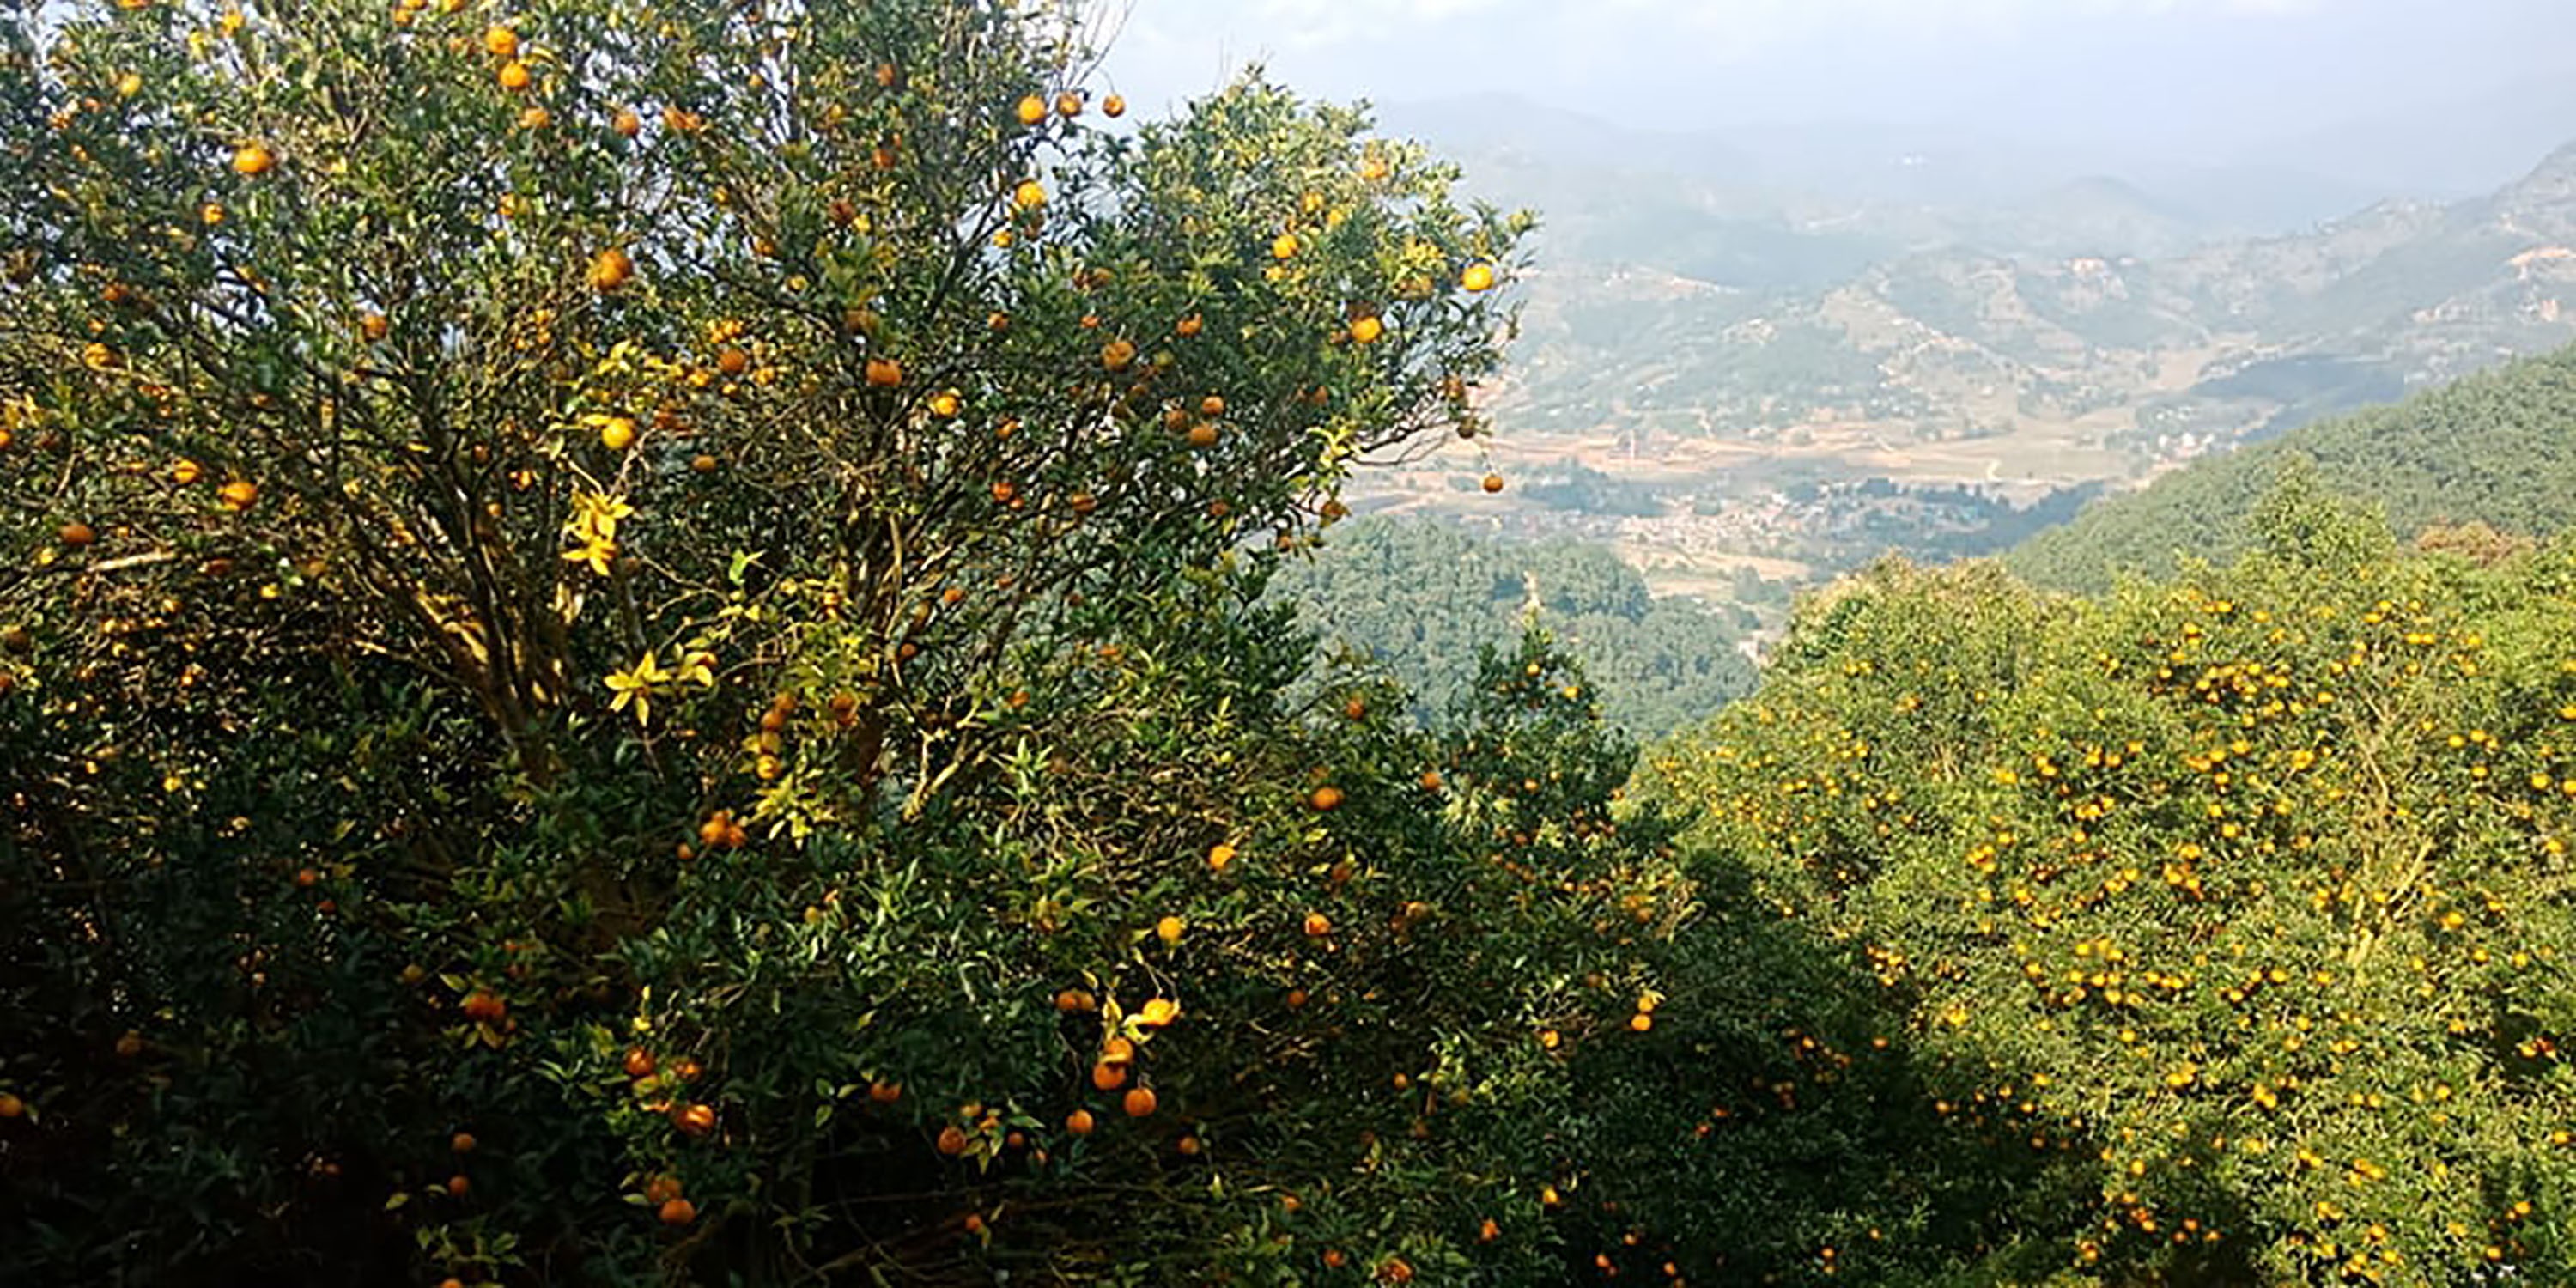 oranges-worth-rs-102m-sold-form-single-plot-in-tanahun